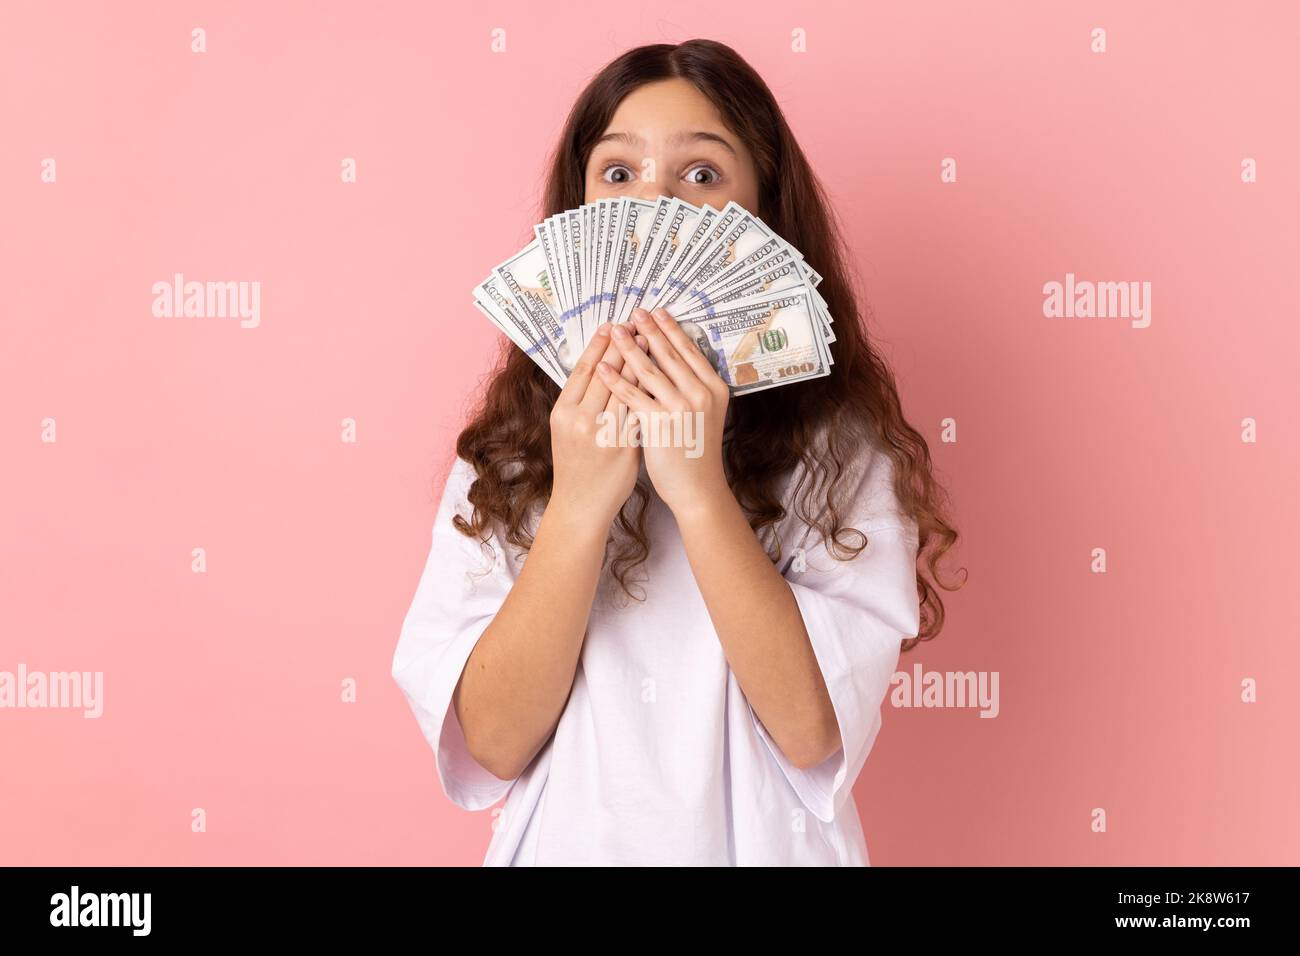 Portrait of surprised little girl wearing white T-shirt covering half of face with big fan of dollar banknotes, looking at camera with big eyes. Indoor studio shot isolated on pink background. Stock Photo